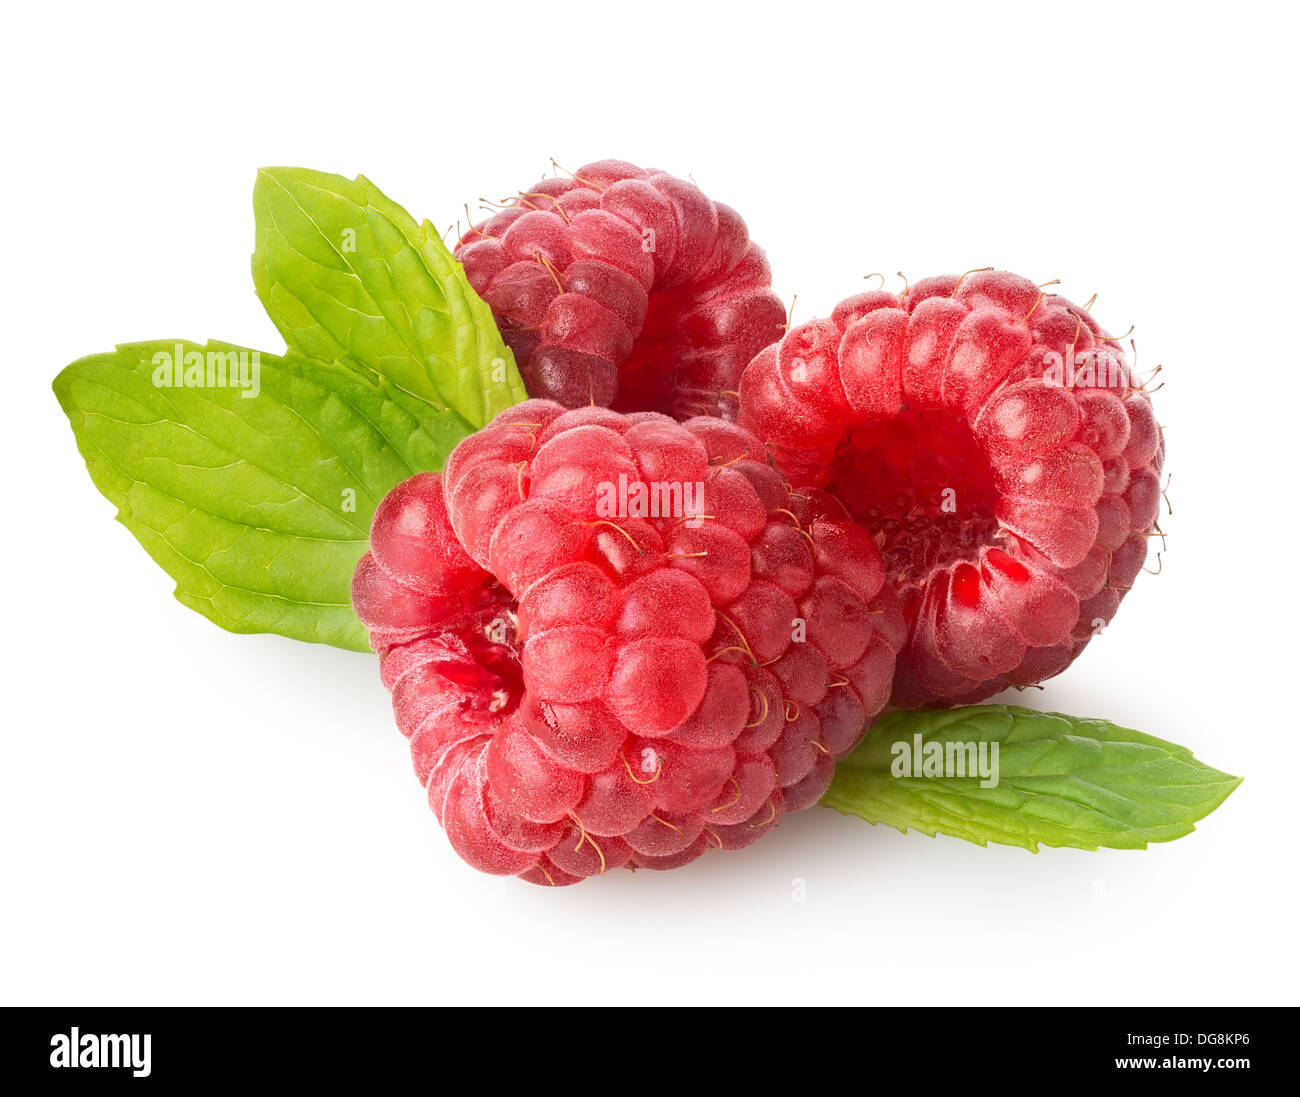 Framboise avec feuille verte isolated on white Banque D'Images